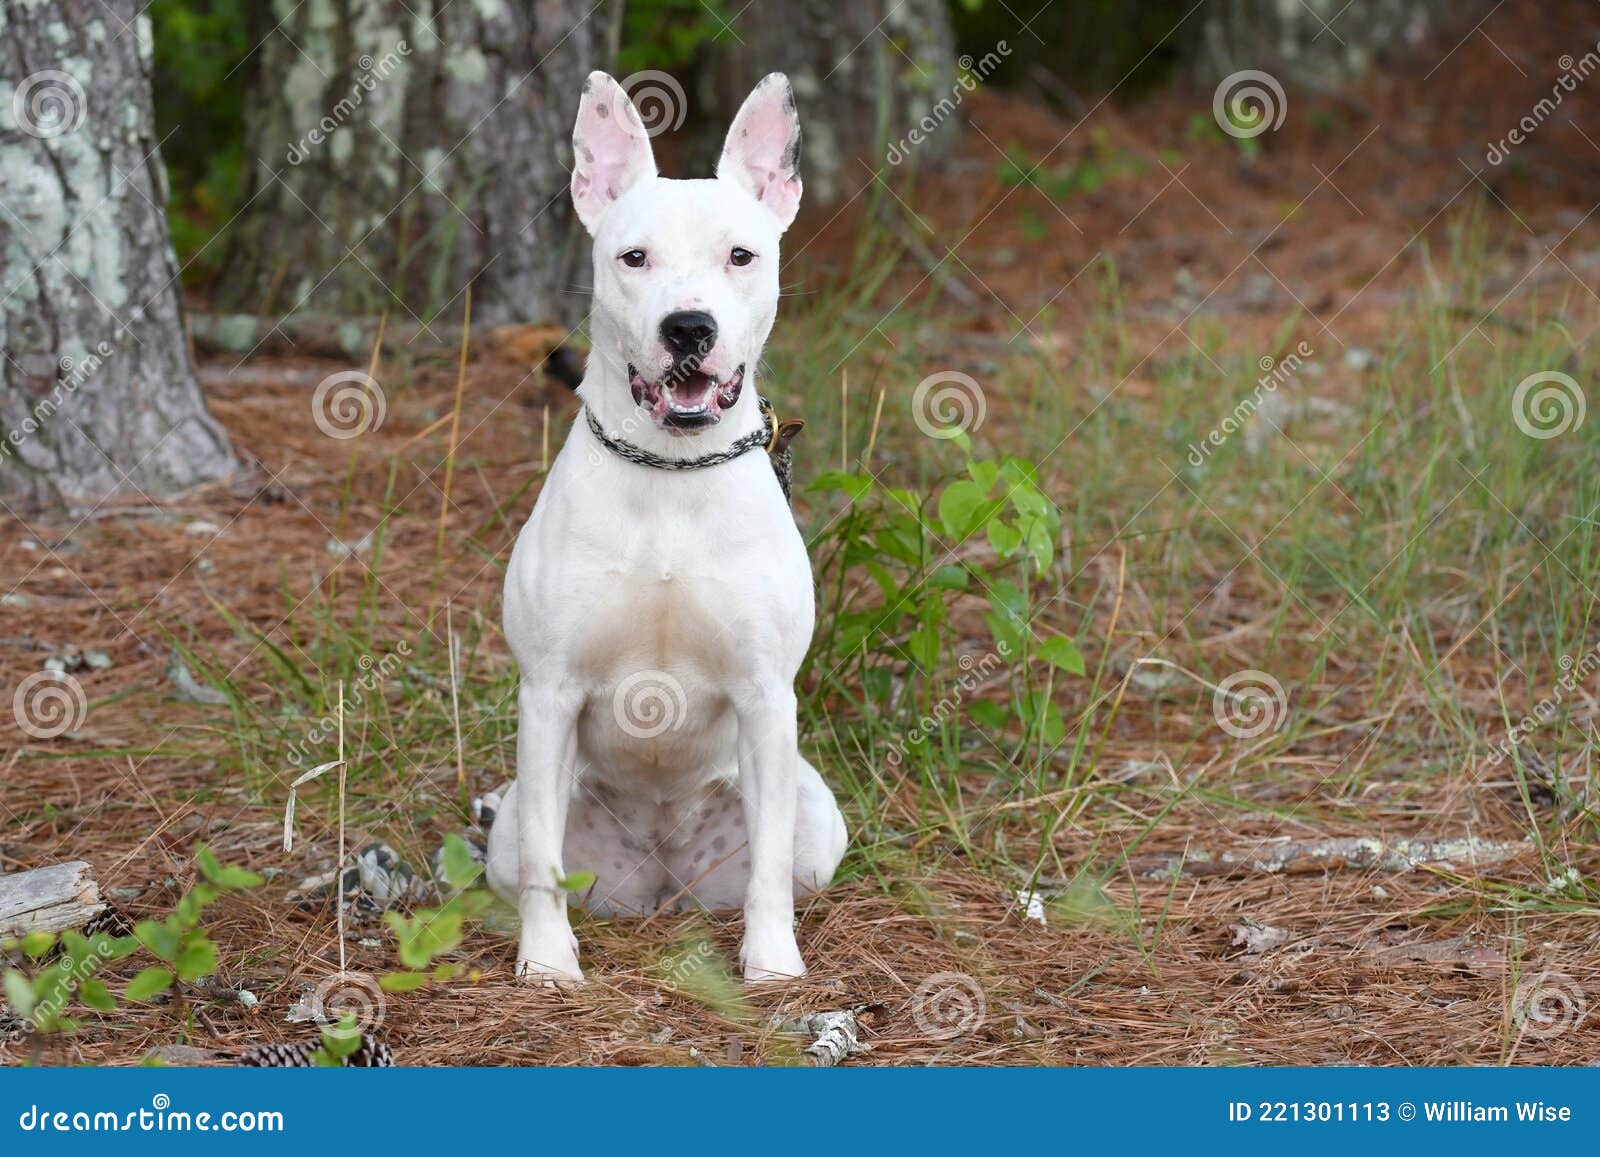 Bull Terrier Mix Breed Dog Sitting Down Outside Stock Image - Image of puppy, sales: